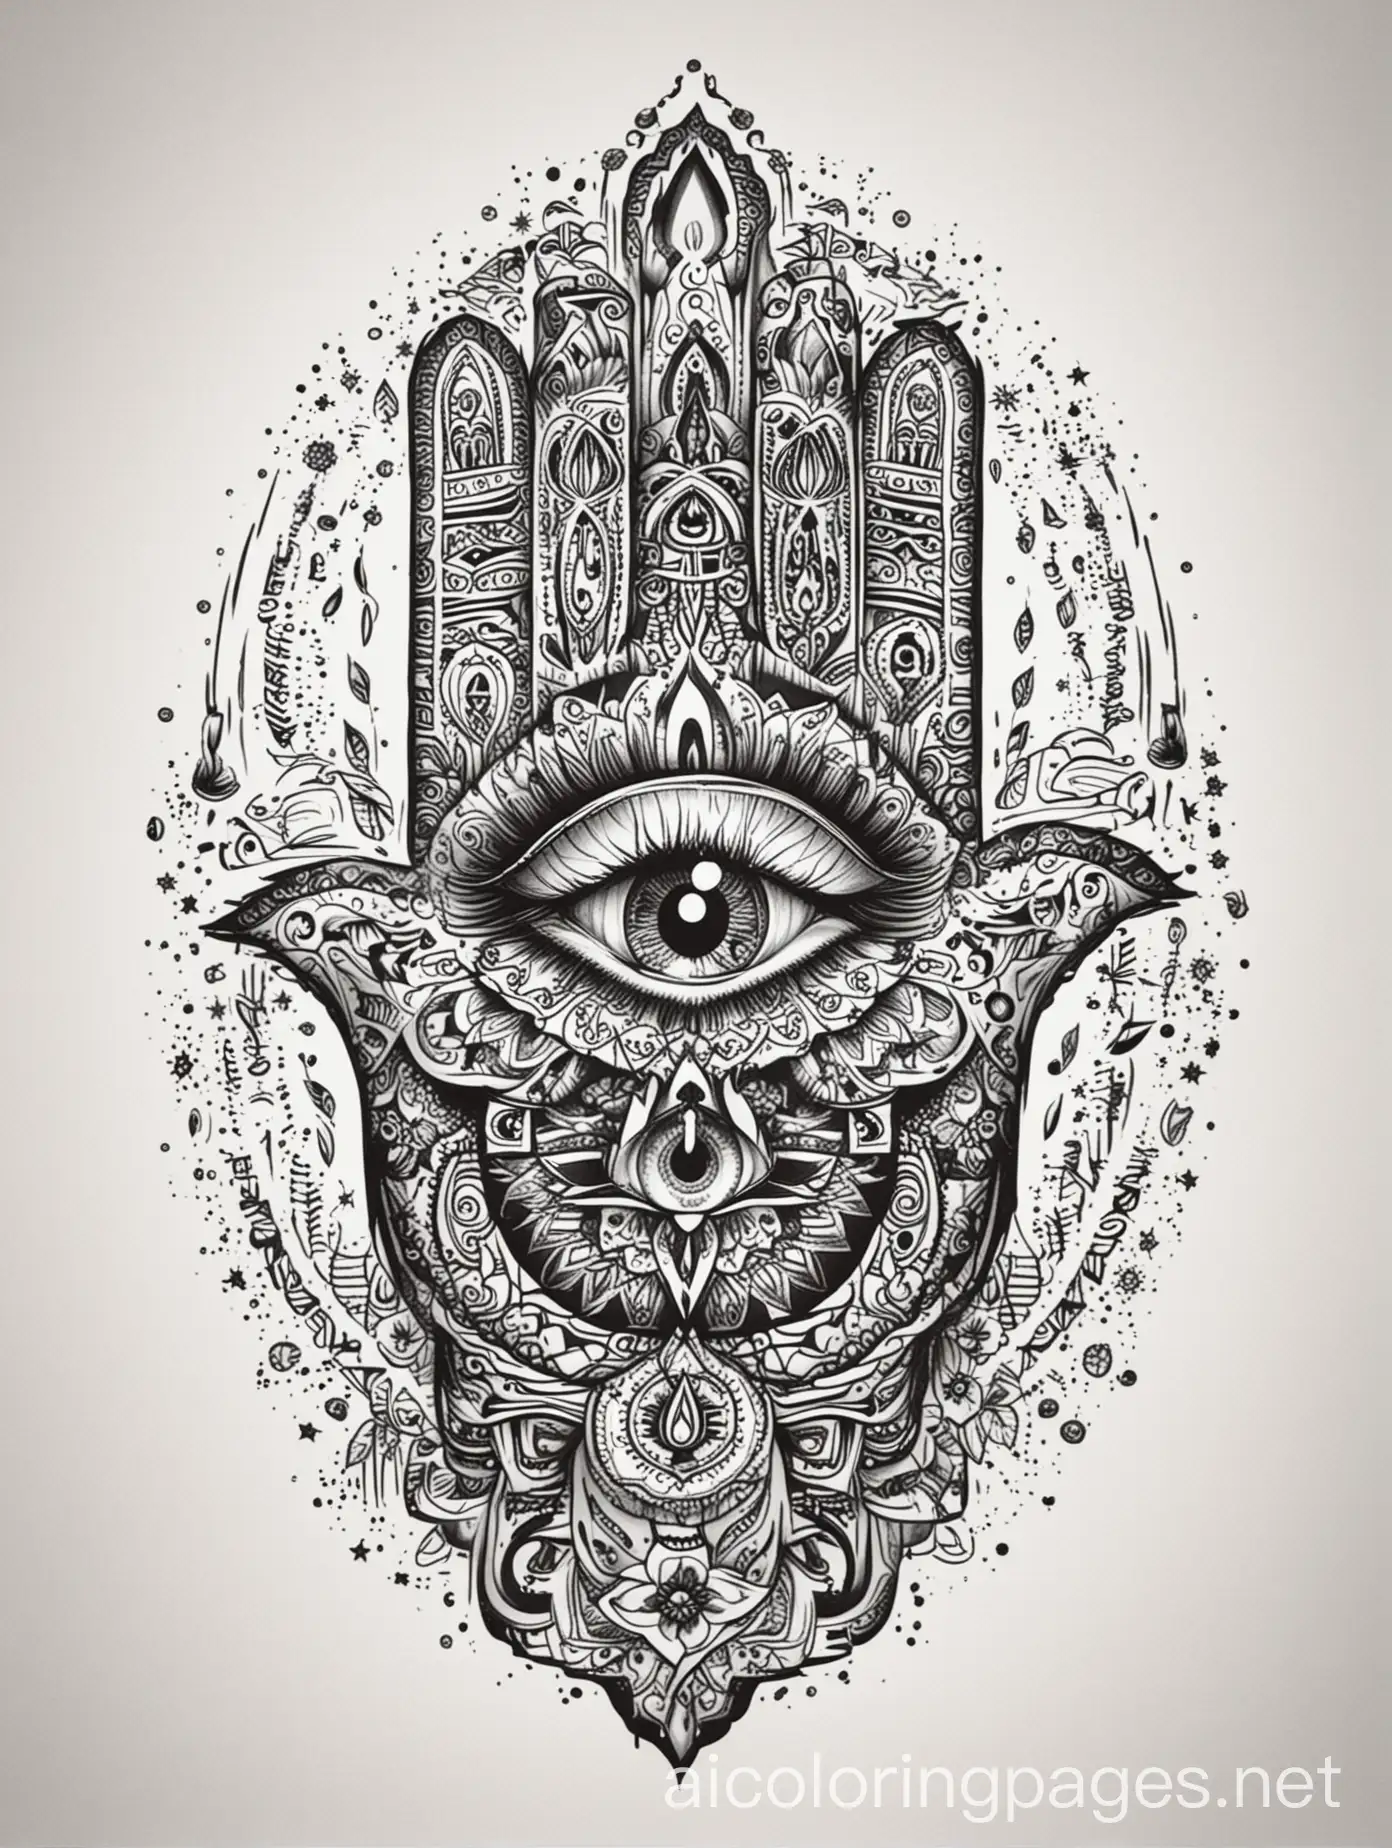 human Hamsa hand, covered in tattoos with light emanating from eye, Coloring Page, black and white, line art, white background, Simplicity, Ample White Space. The background of the coloring page is plain white to make it easy for young children to color within the lines. The outlines of all the subjects are easy to distinguish, making it simple for kids to color without too much difficulty